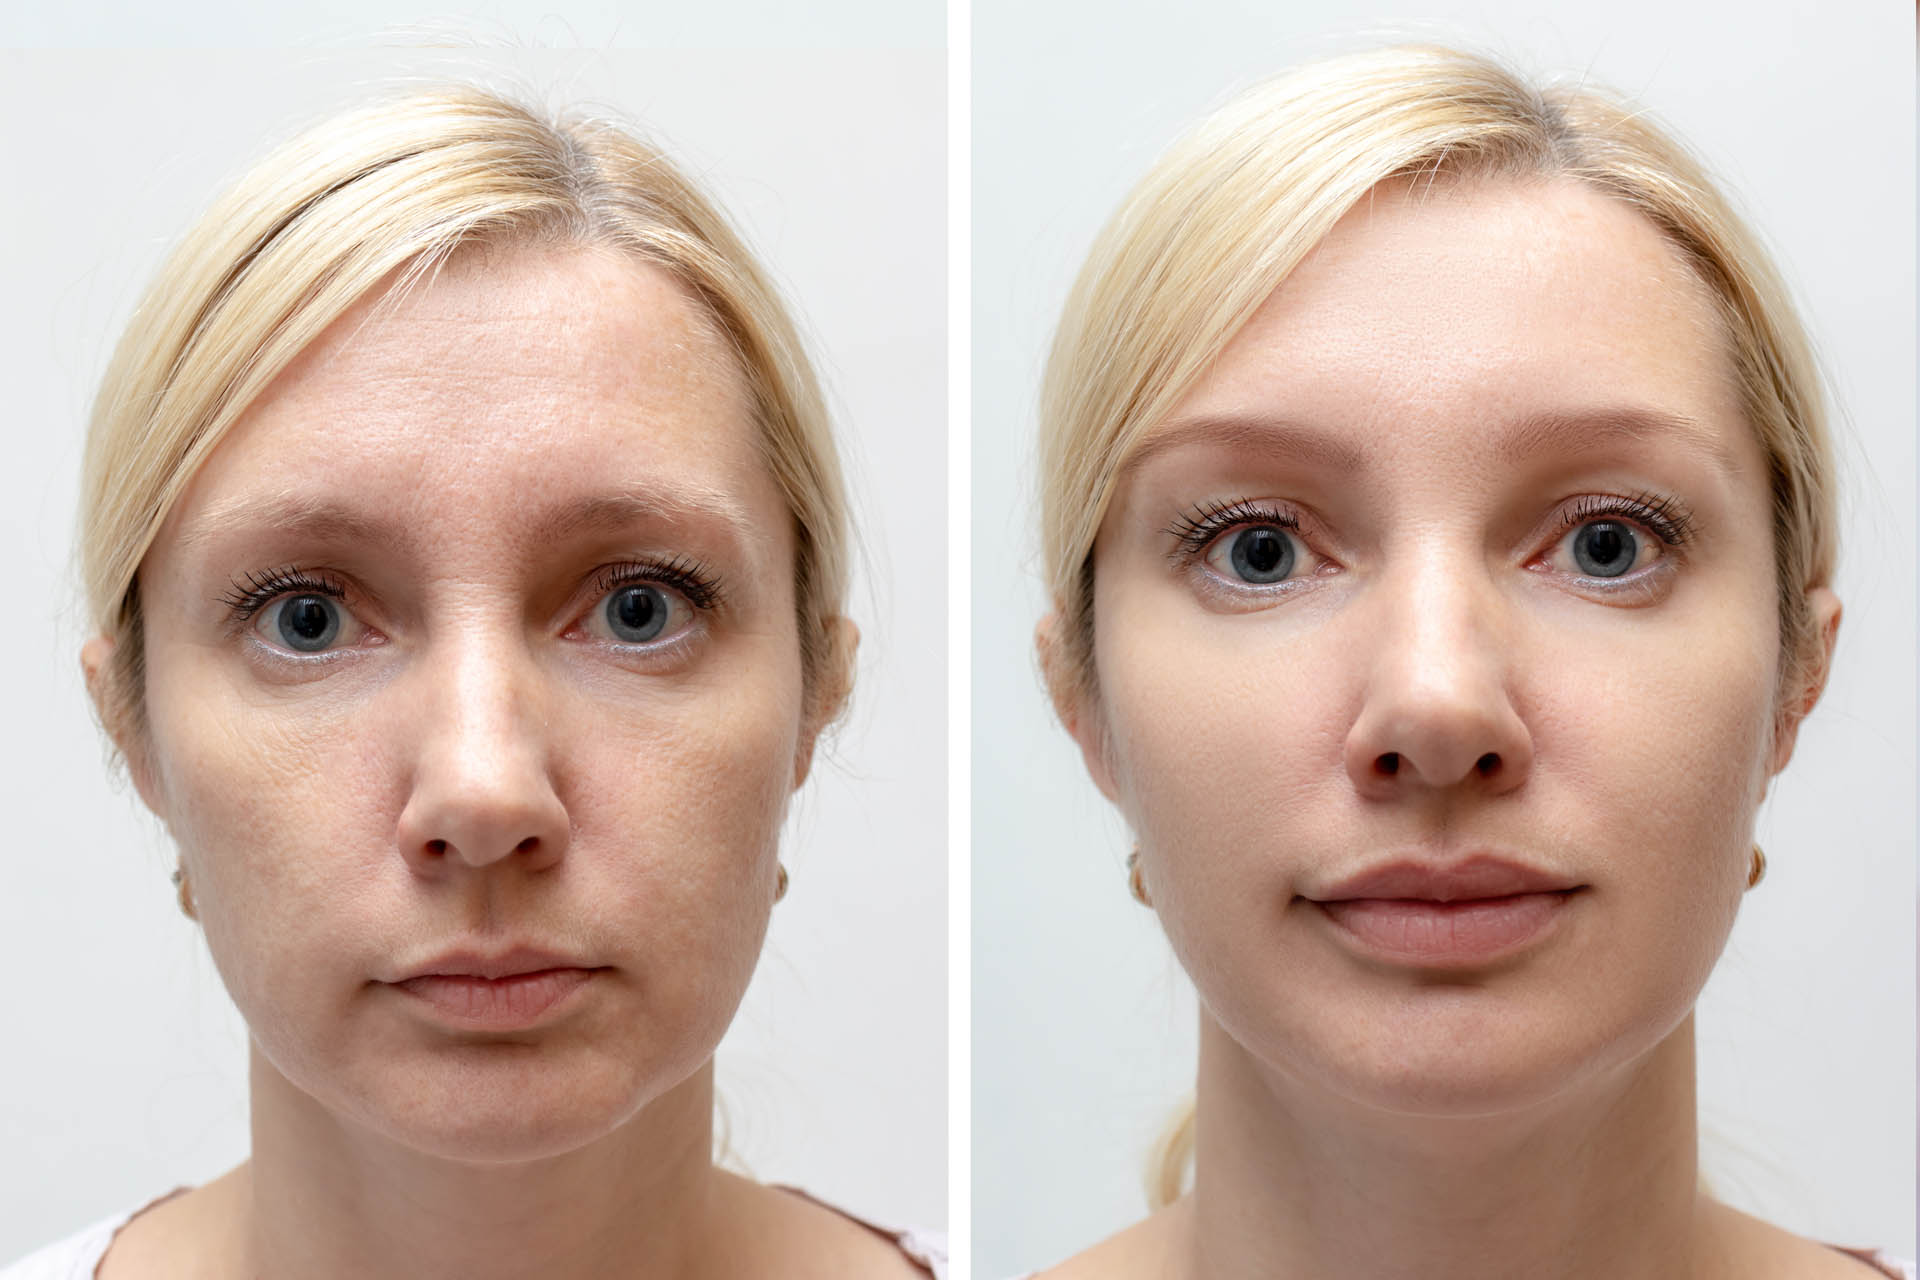 Before and After Advanced Botox and Dermal Filler Training